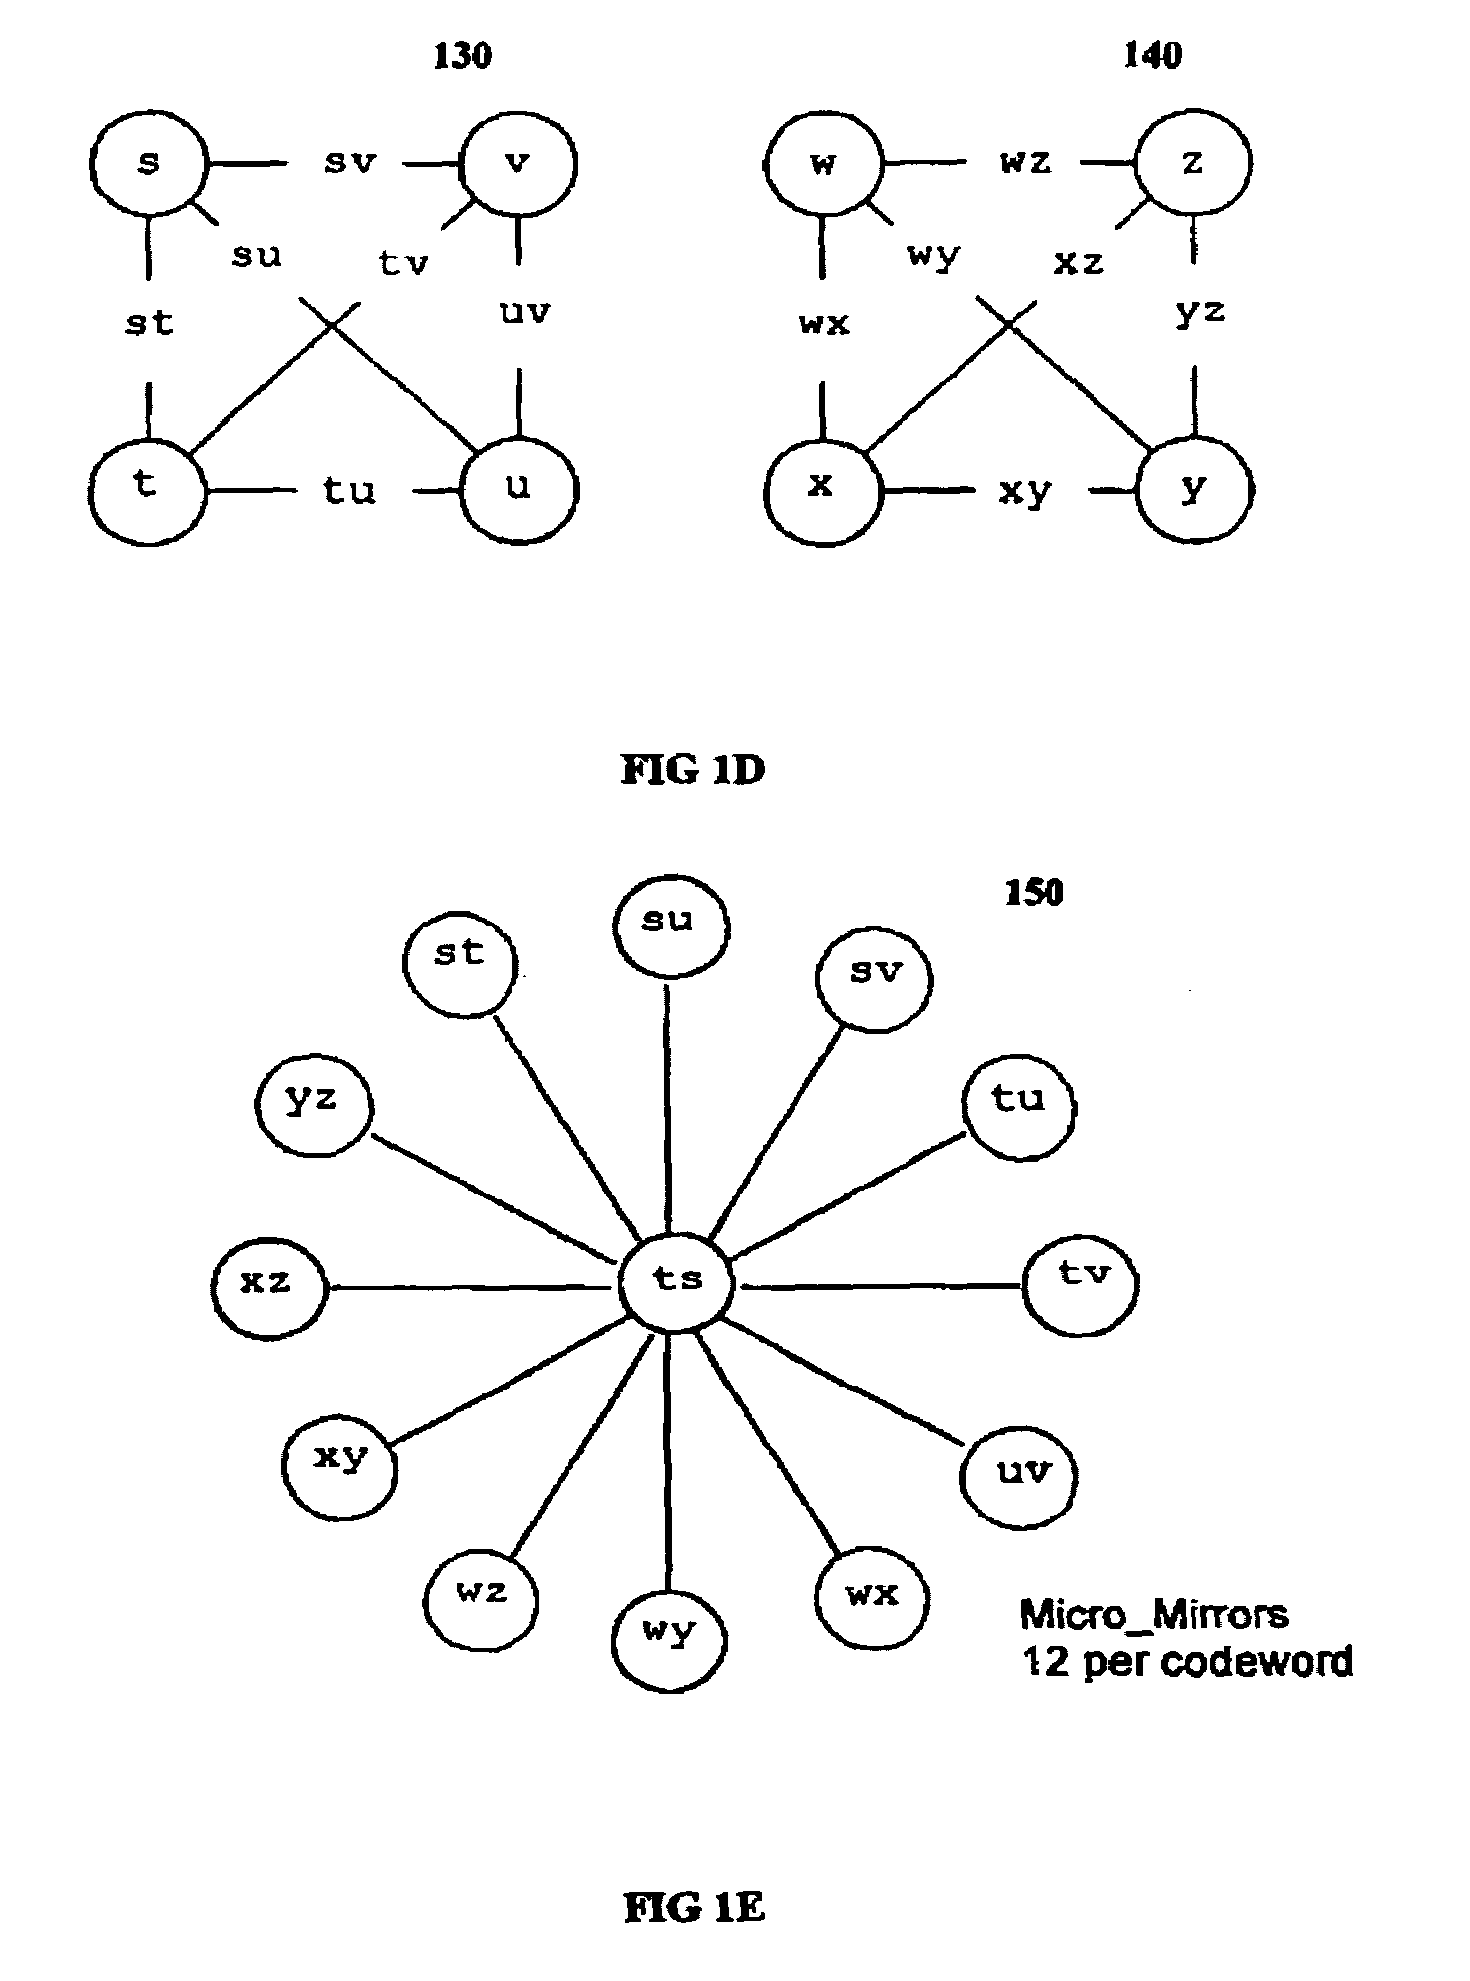 Multi-dimensional data protection and mirroring method for micro level data